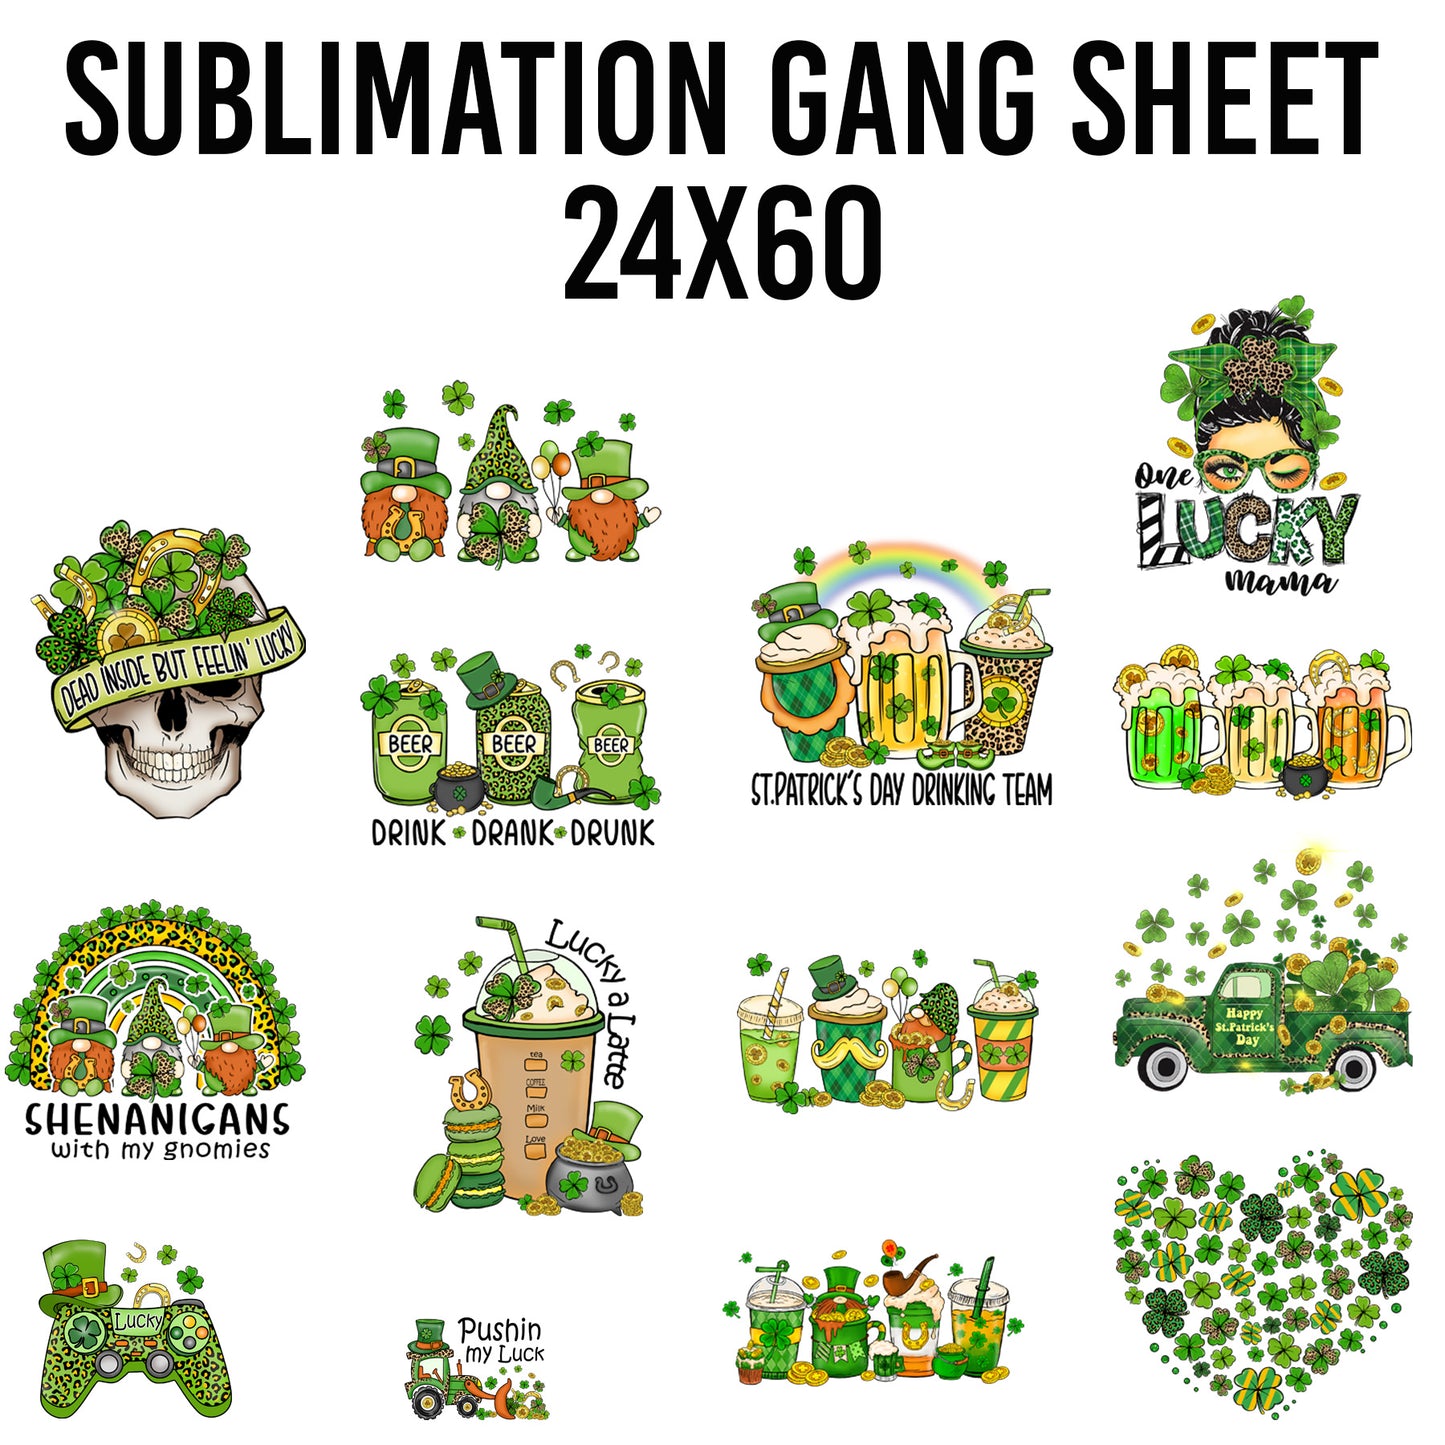 St. Patrick's Day #1 Sublimation 24x60 Gang Sheet